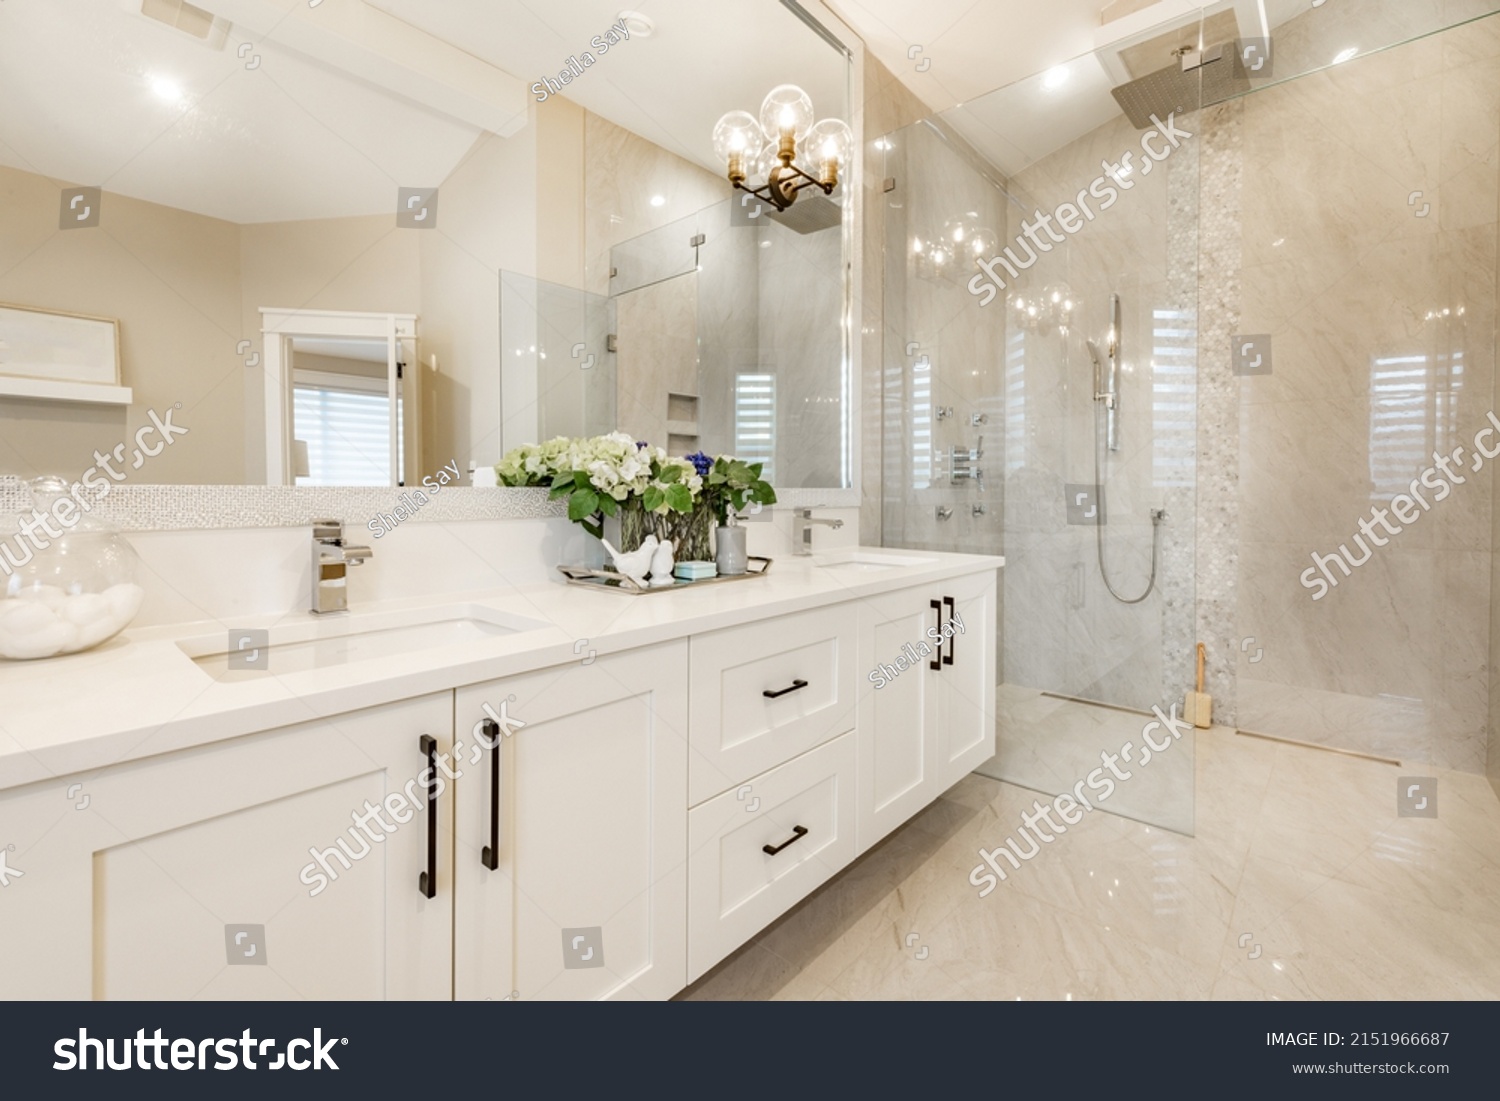 Spacious master bathroom with glass wall shower free standing bathtub large mirrors toilet with privacy wall and white cabinets #2151966687